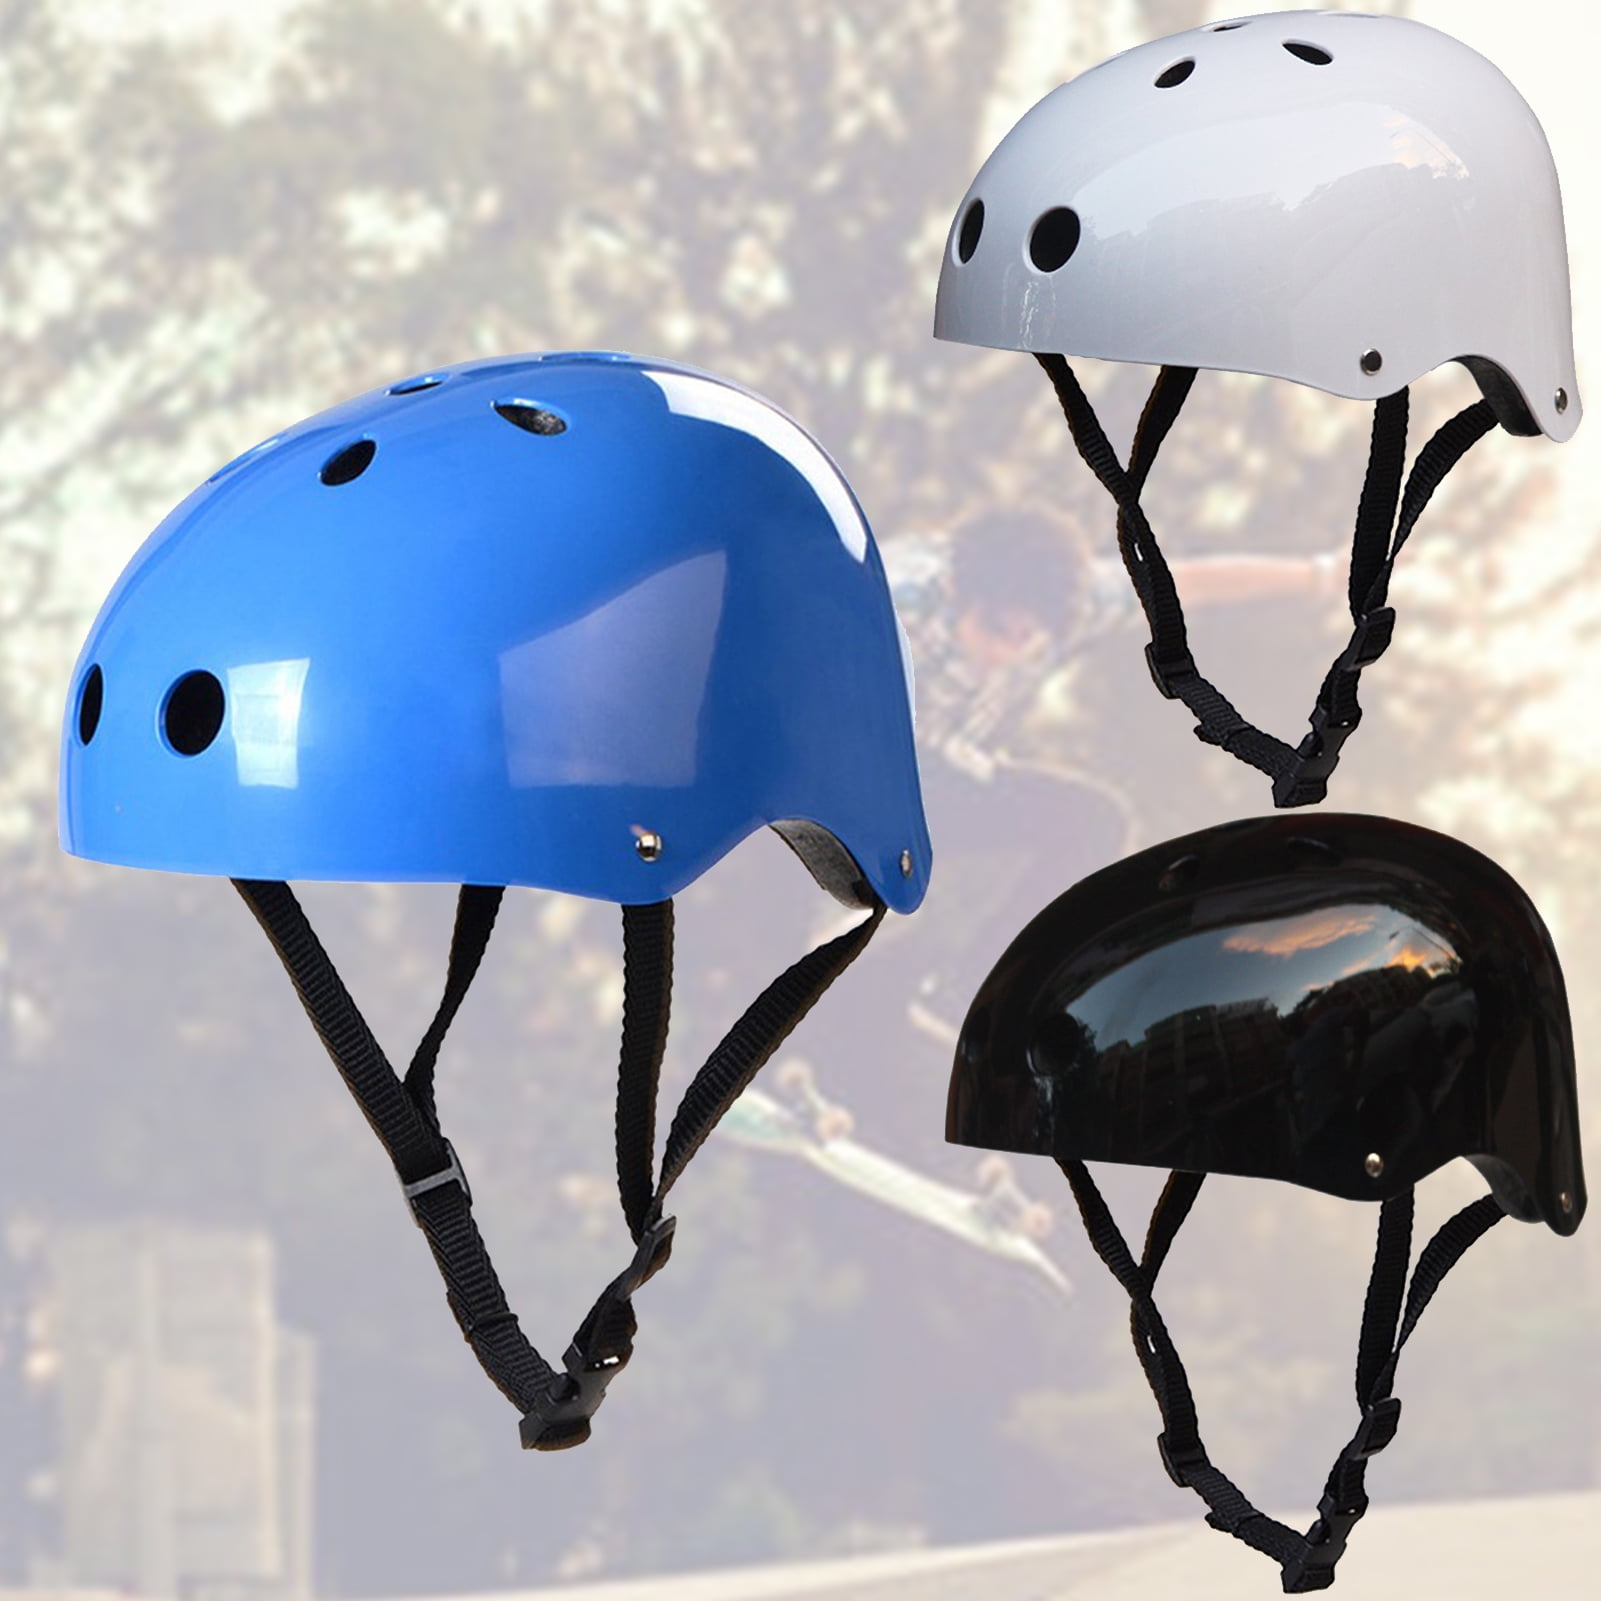 Adult Helmet Camoflage 58cm-60cm Cycling Skateboard Scooter Protective Gear 